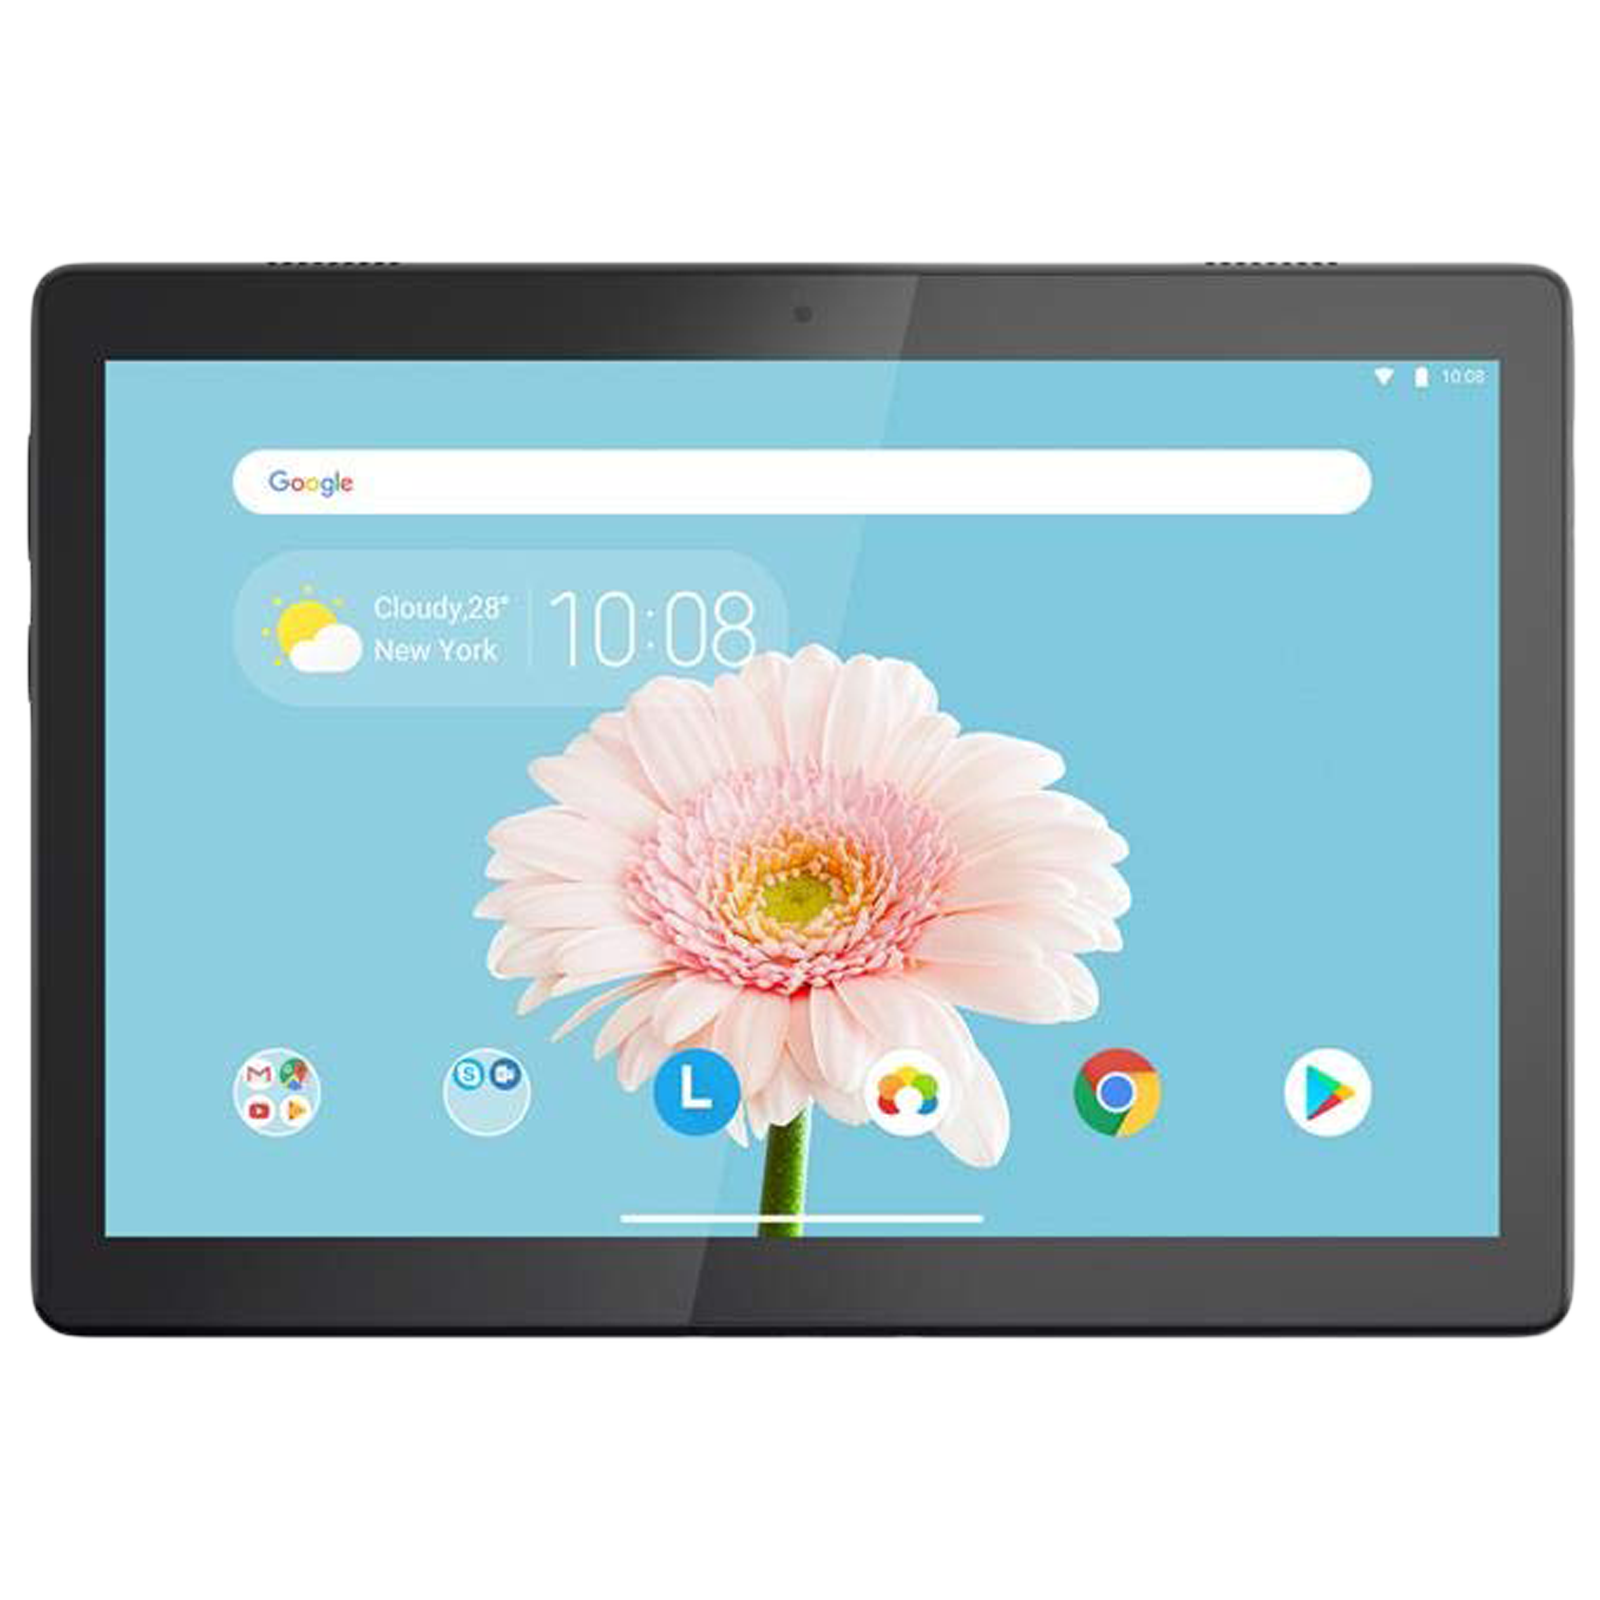 Lenovo Tab M10 REL Wi-Fi + 4G Android Tablet (Android 9.0 Pie, Qualcomm Snapdragon 450, 25.65 cm (10.1 Inches), 4GB RAM, 64GB ROM, ZA500125IN, Slate Black)_1